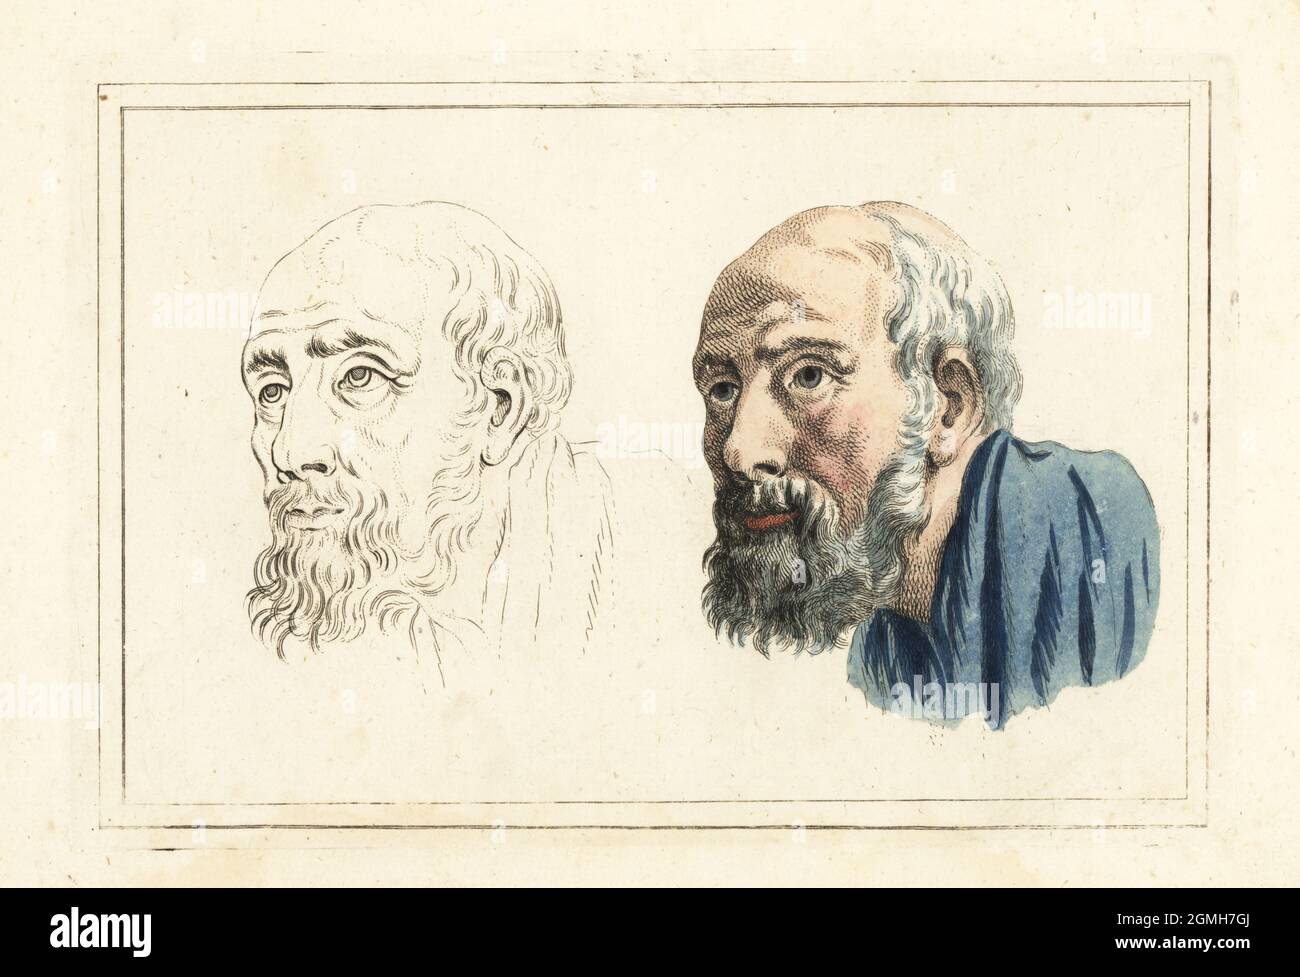 Figures from an 18th century colouring book. Professionally coloured examples of a bust of an old man and plain version. Handcoloured copperplate engraving from Robert Sayer’s The Artist’s Vade Mecum, Being the Whole Art of Drawing, London, 1766. Stock Photo